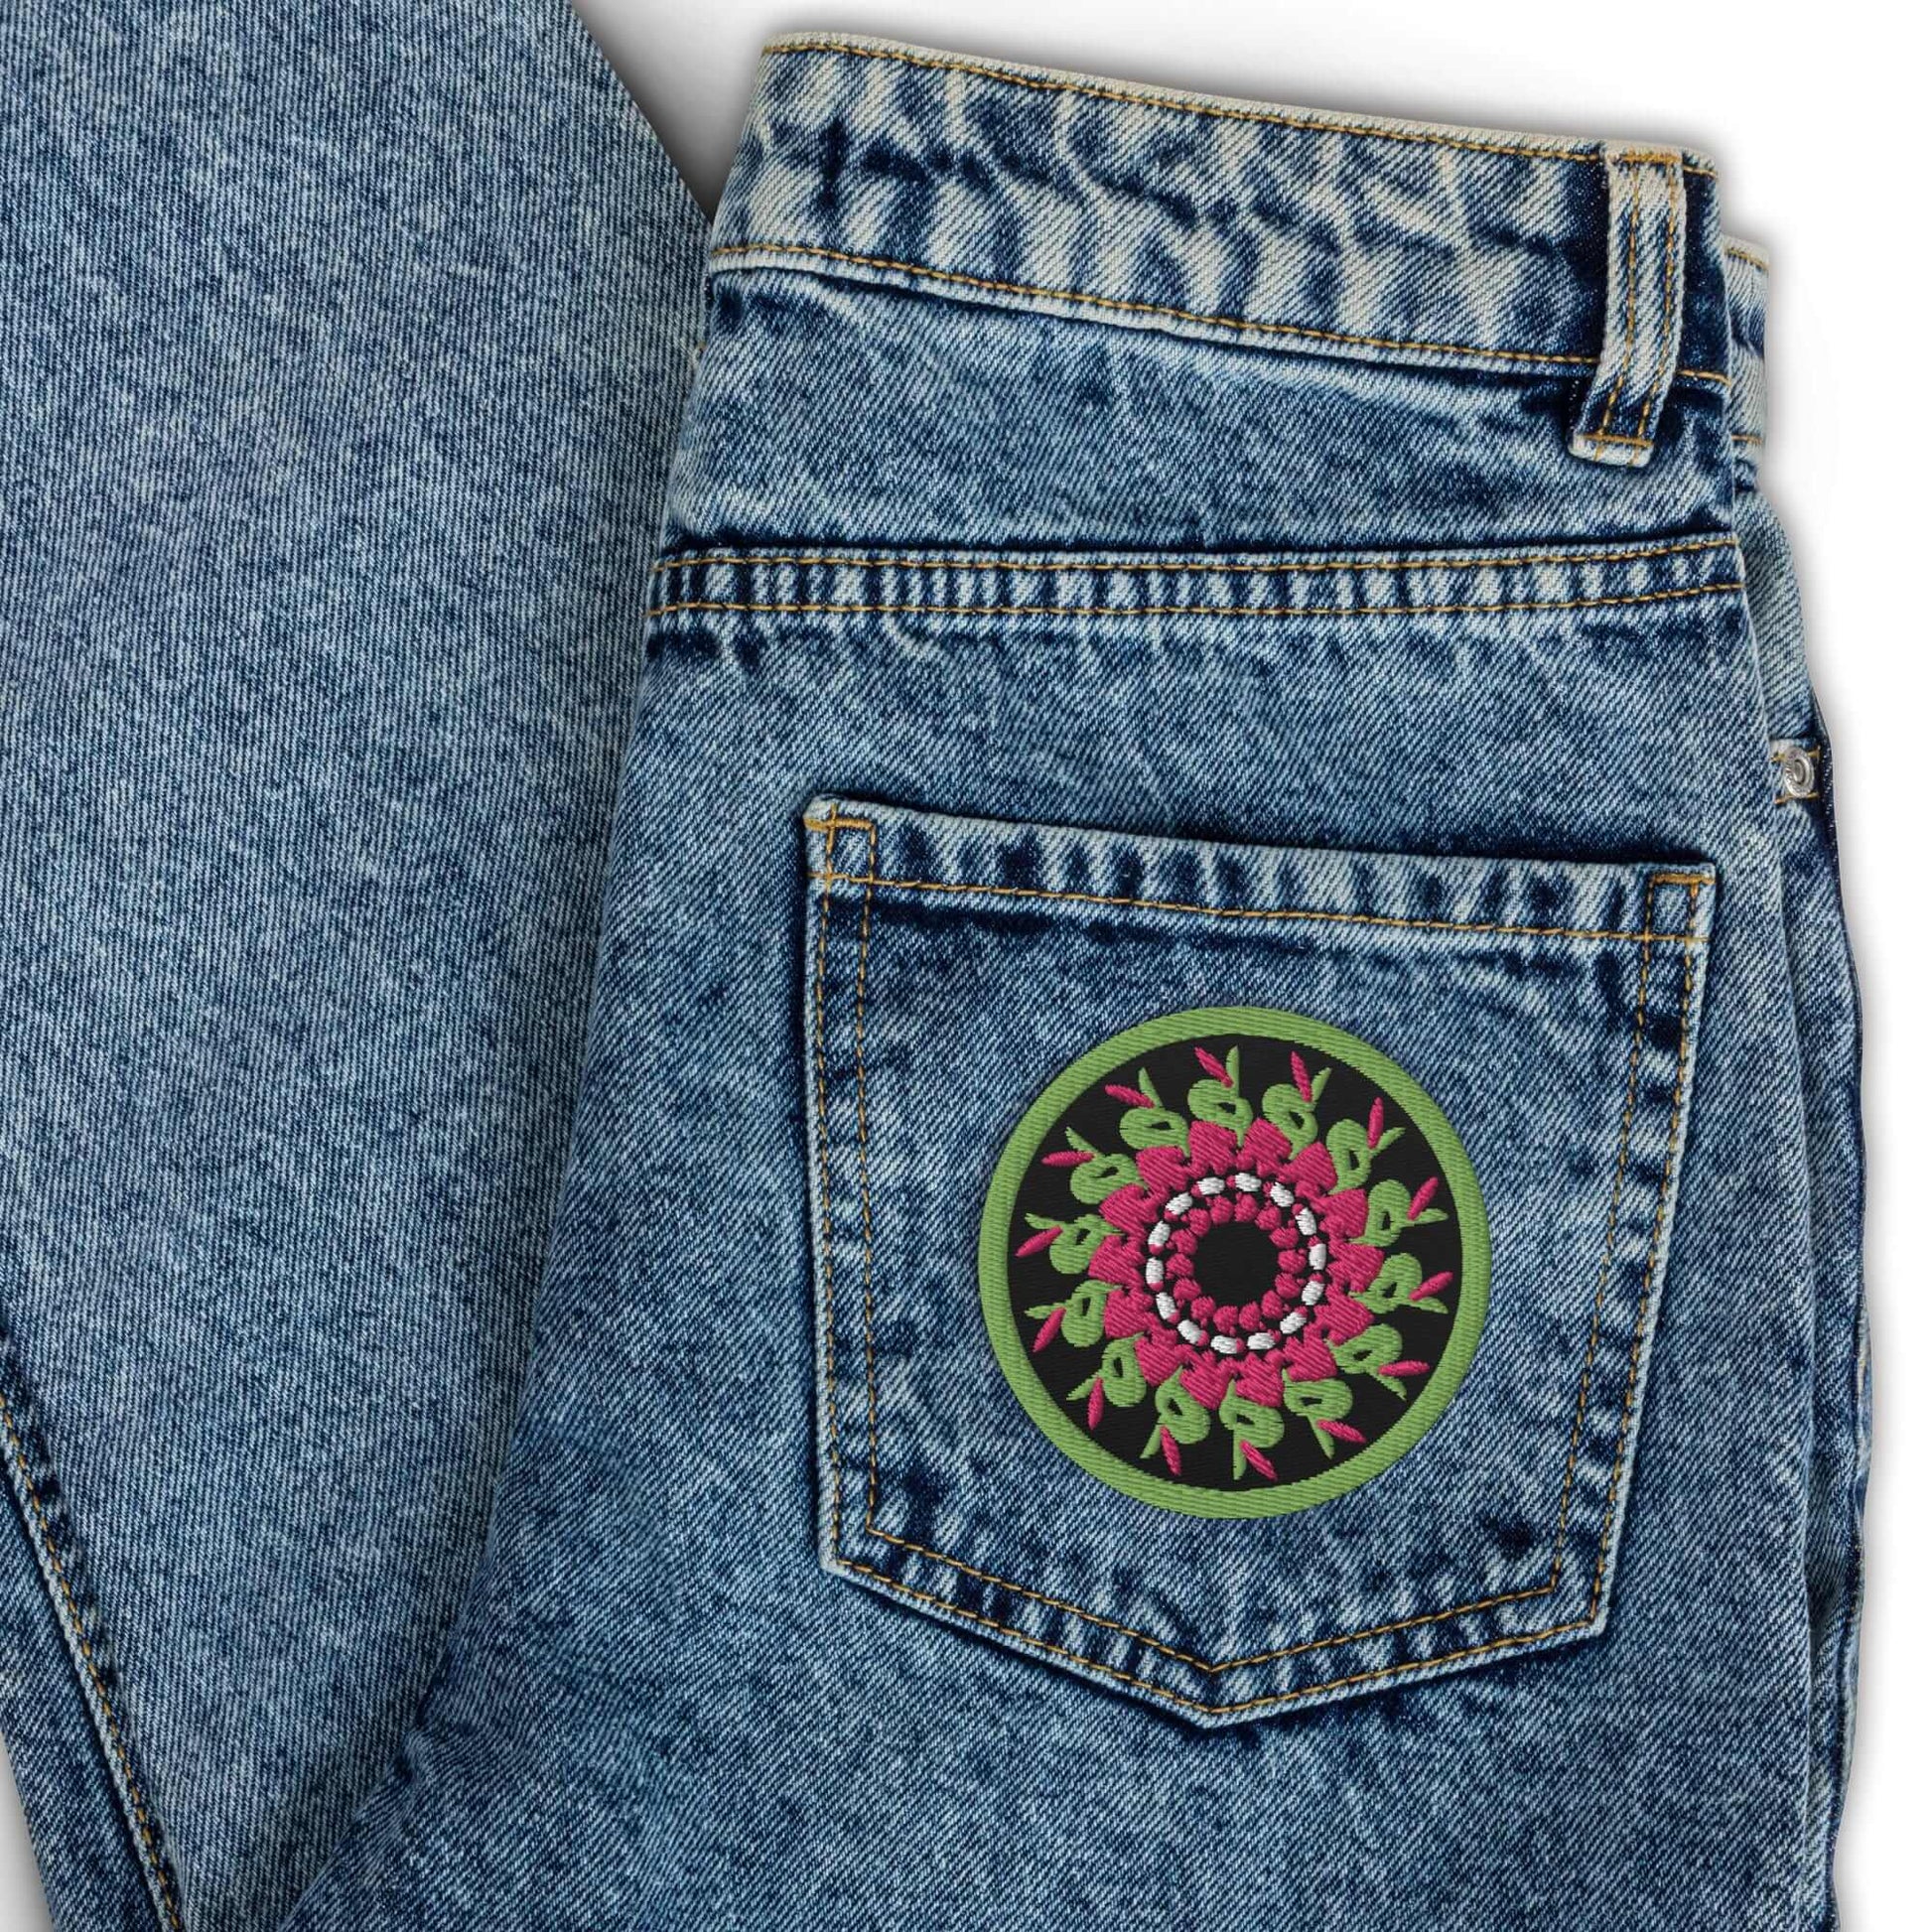 Embroidered Iron on Patches for Denim Jackets, Jeans, Clothes